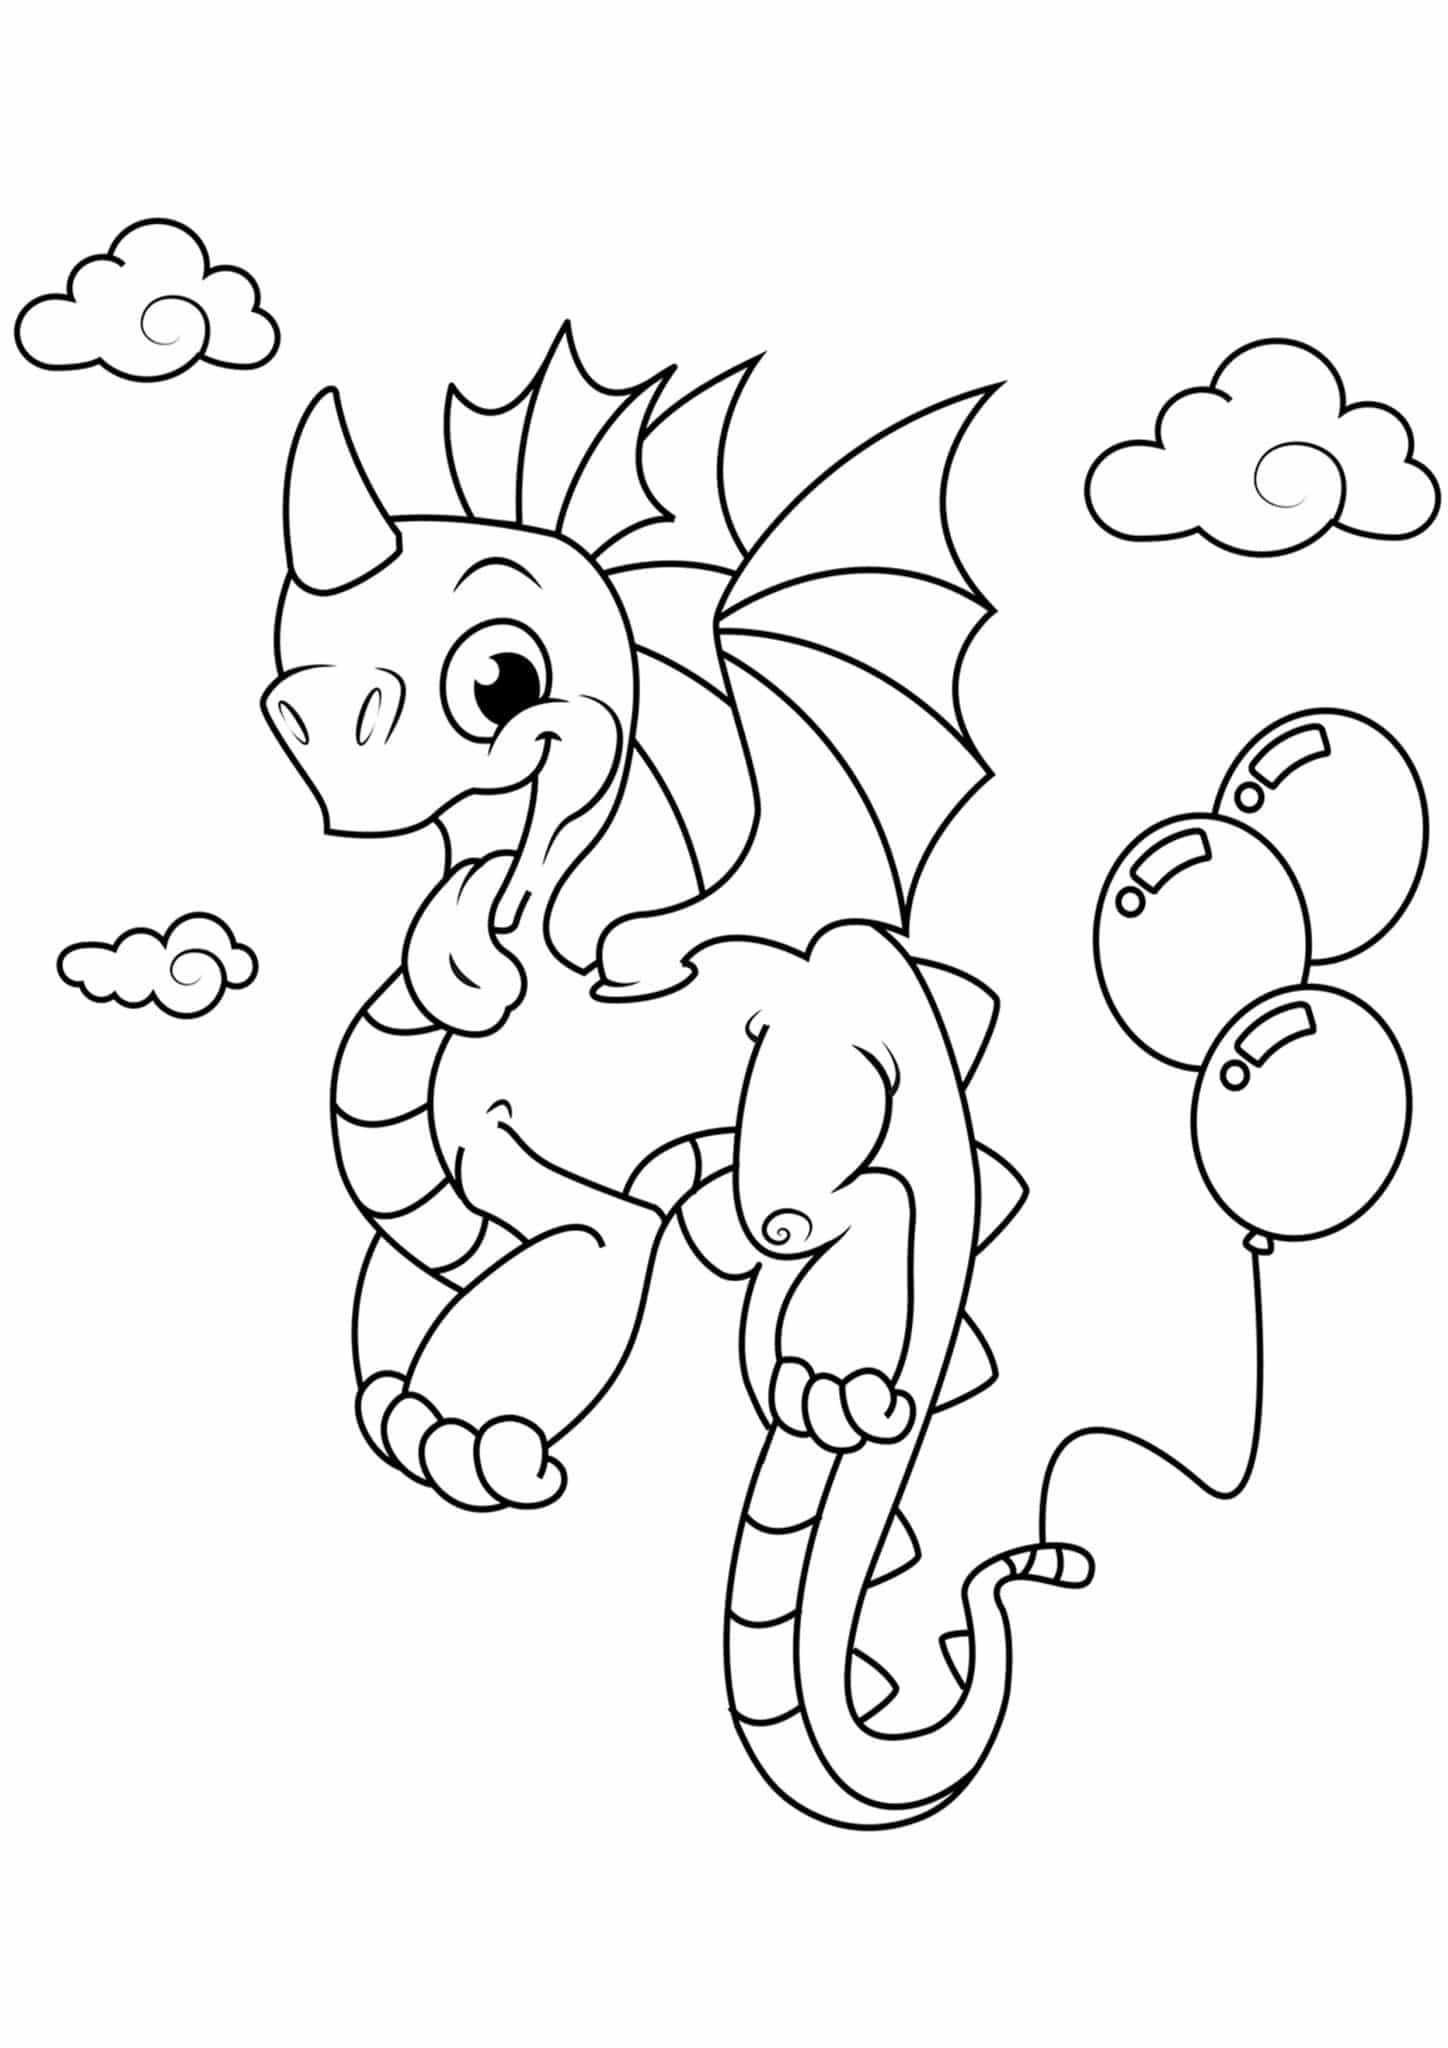 easy-dragon-coloring-pages-mrspilot